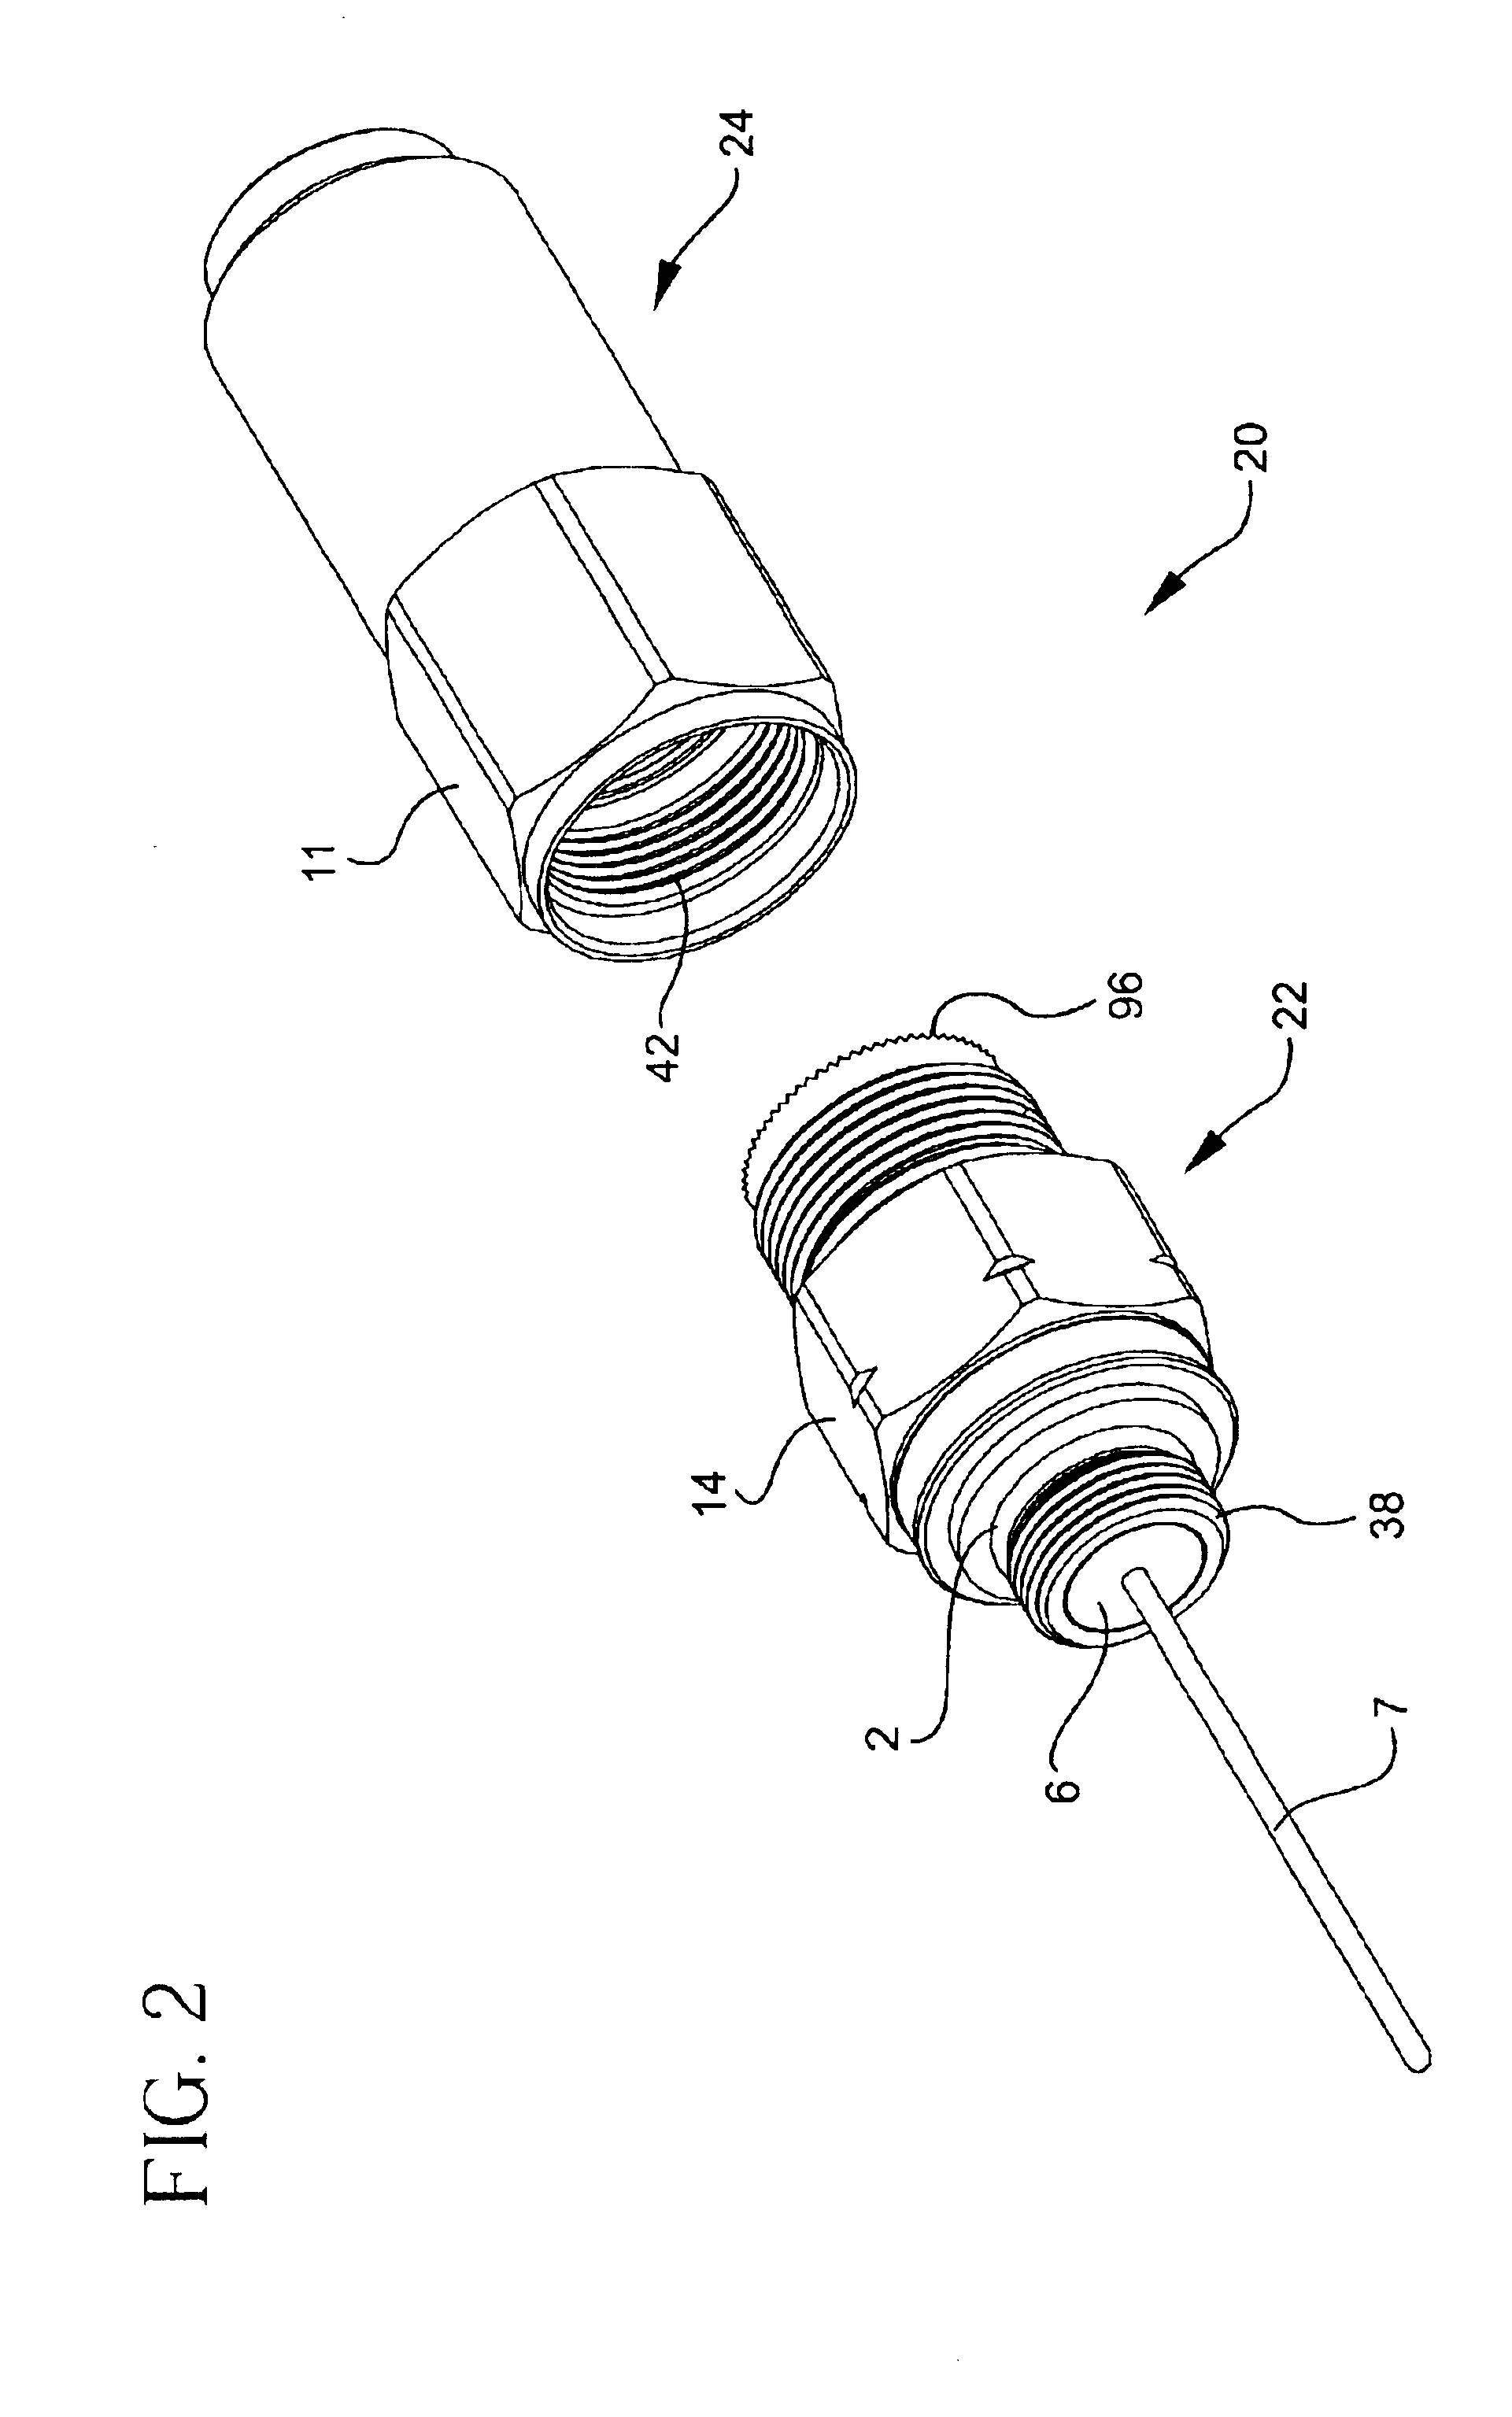 Connector for hard-line coaxial cable